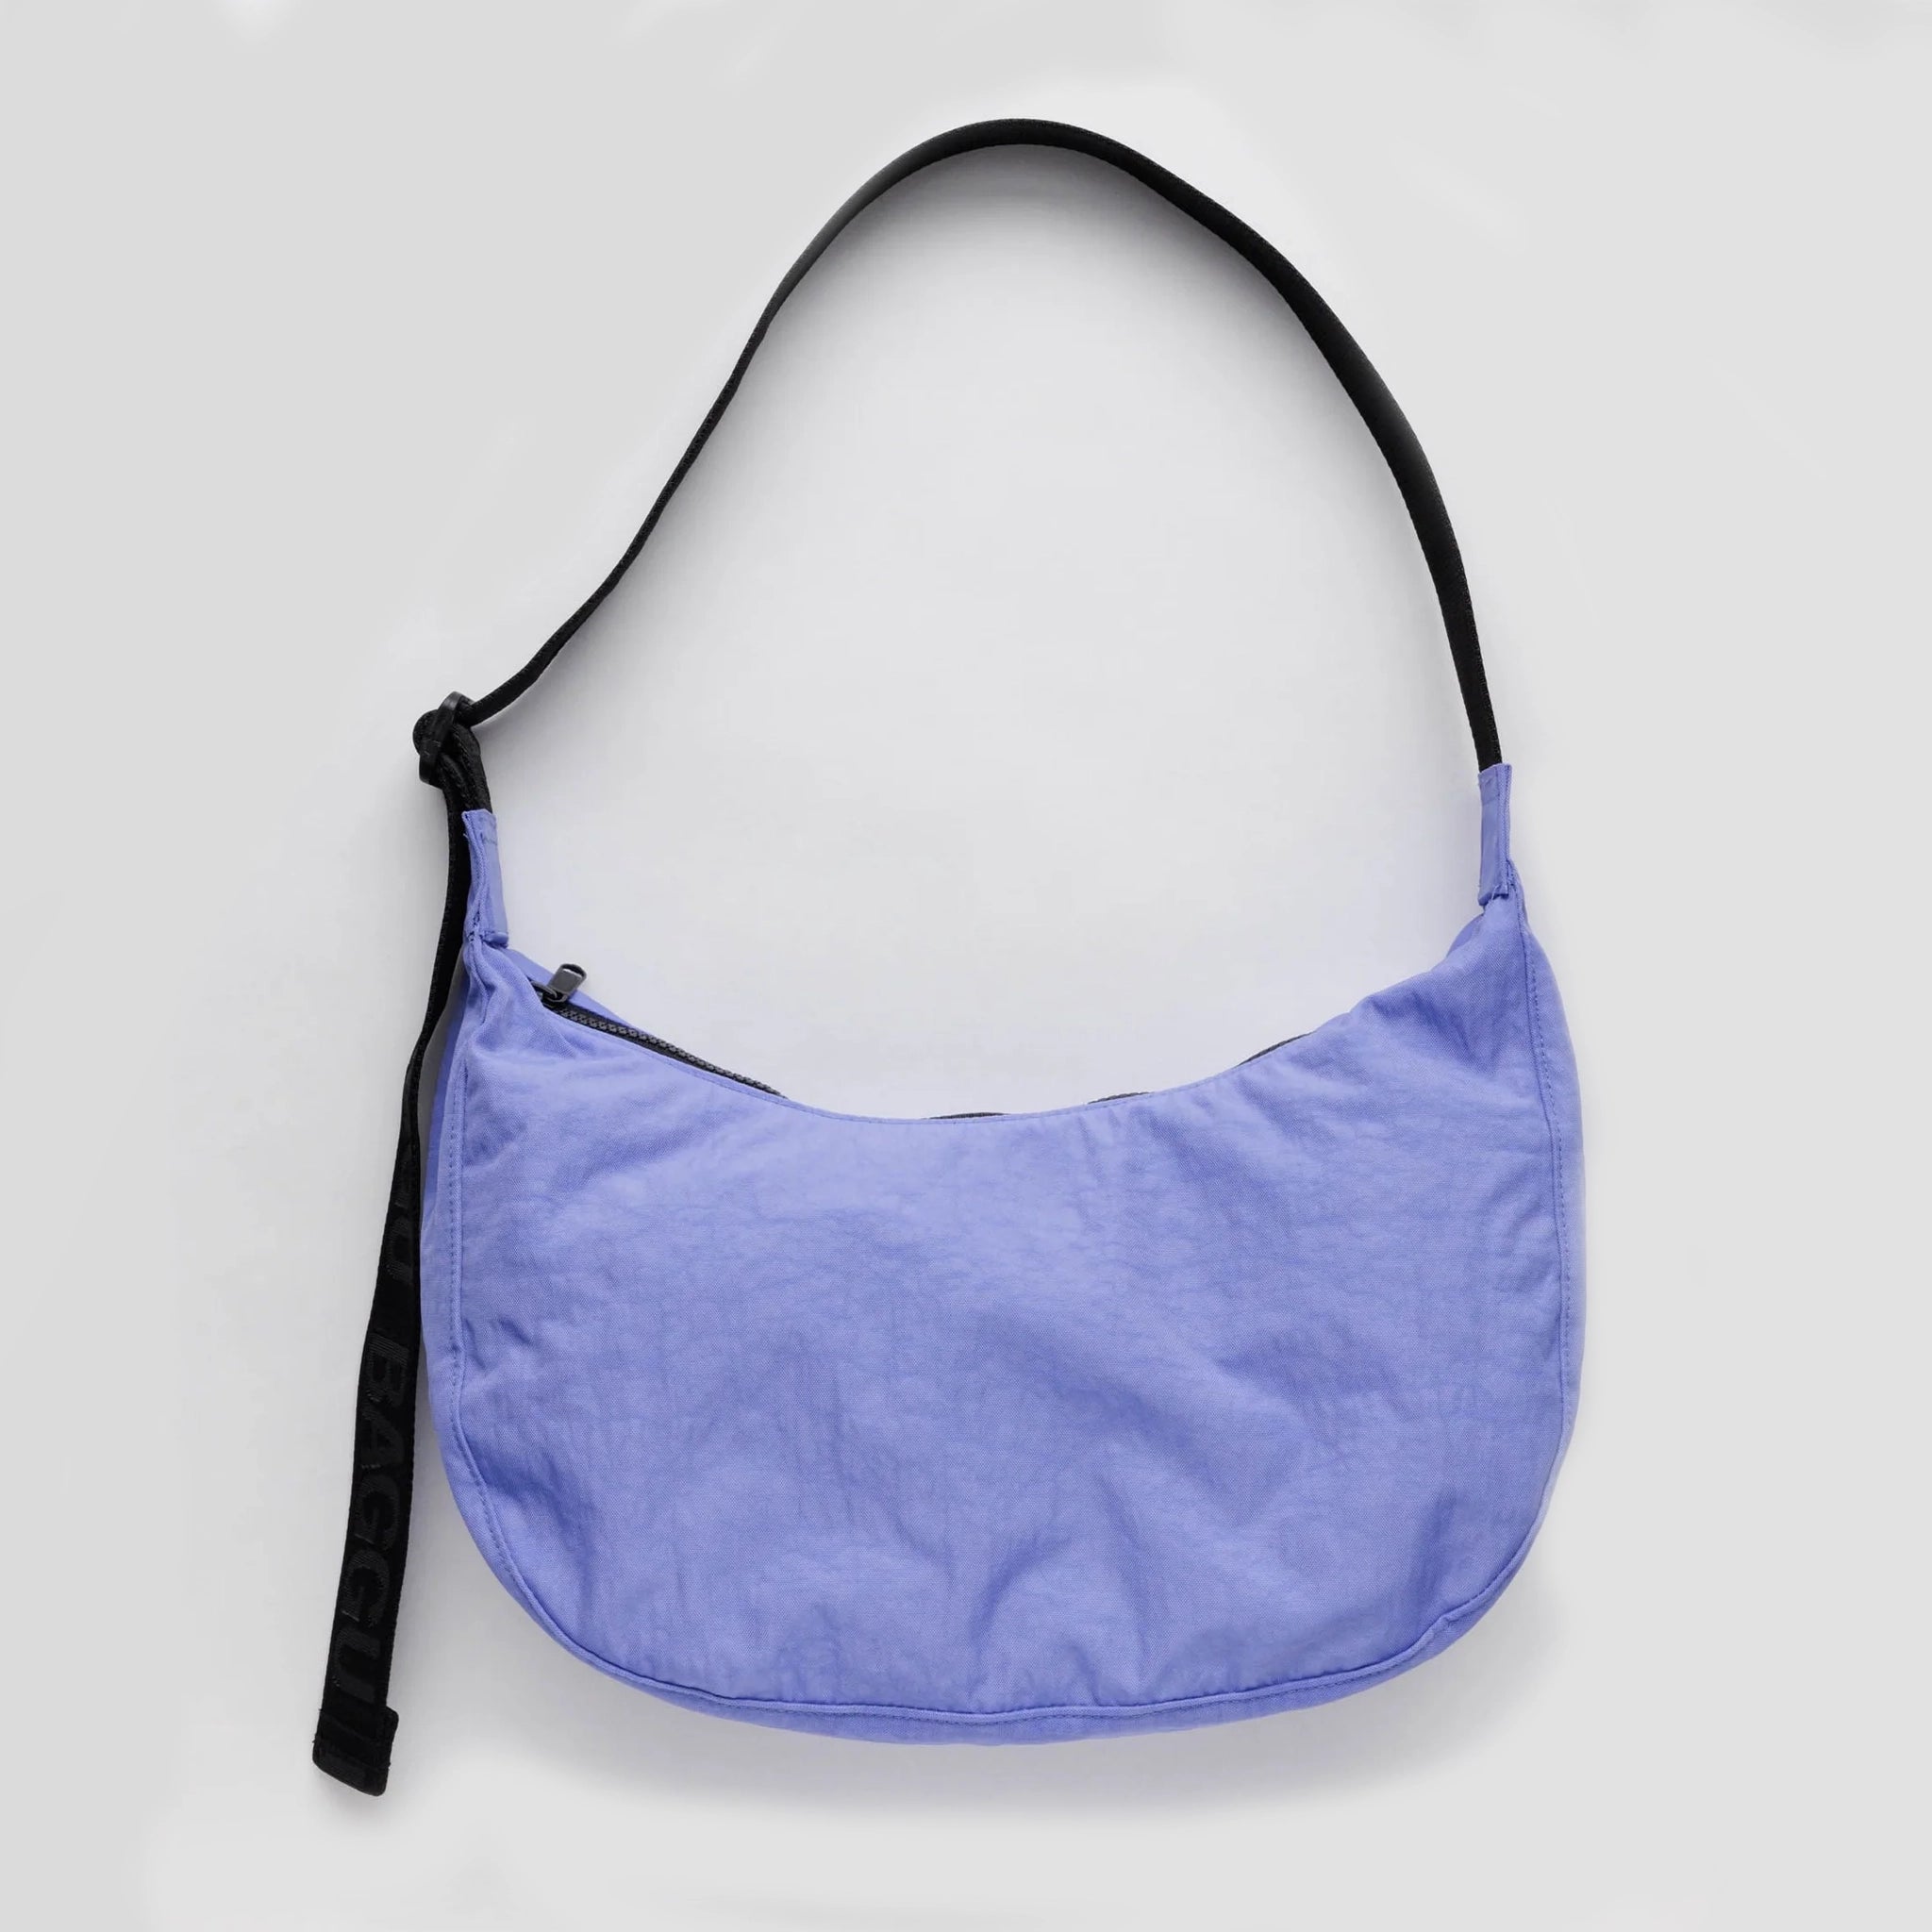 On a white background is a blue crescent handbag with black accents and a black over the shoulder strap. 